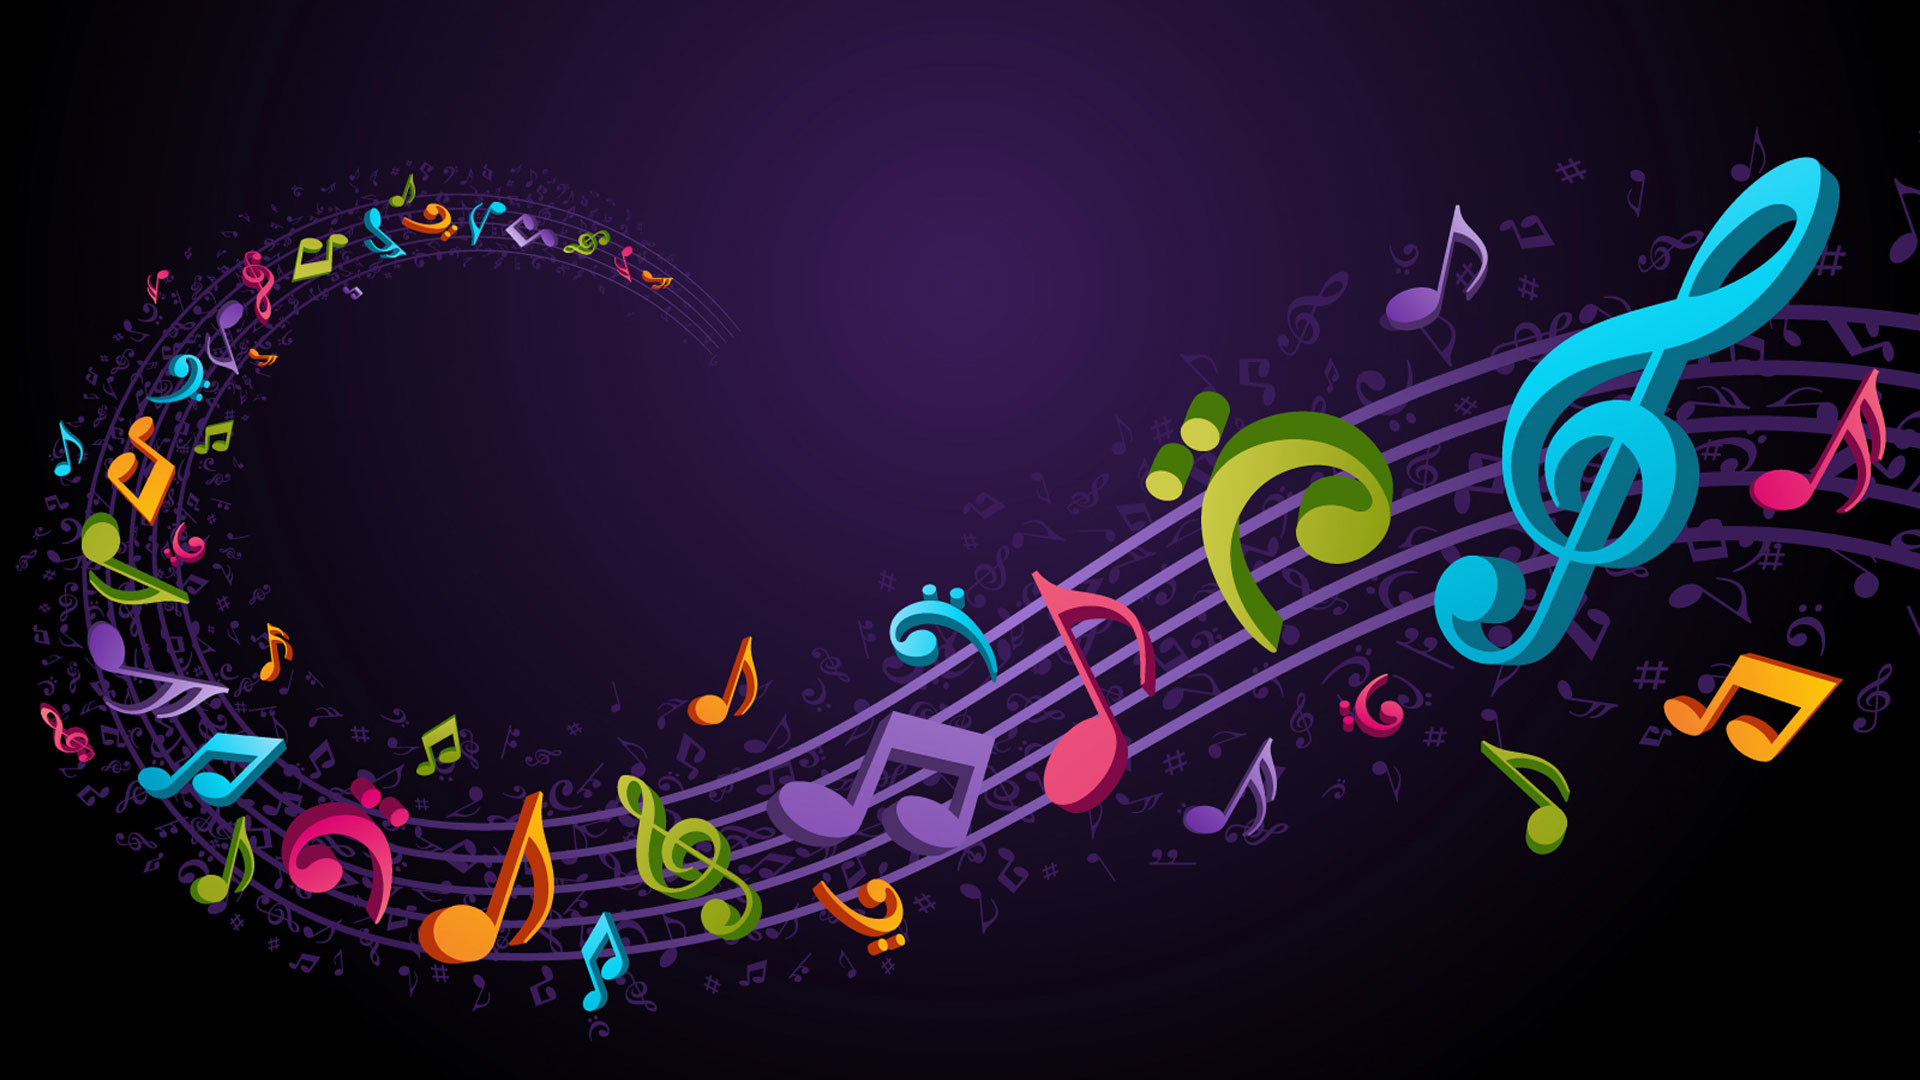 1920x1080 MUSIC ABSTRACT FLYING MUSIC NOTES COLORFUL DESKTOP BACKGROUND